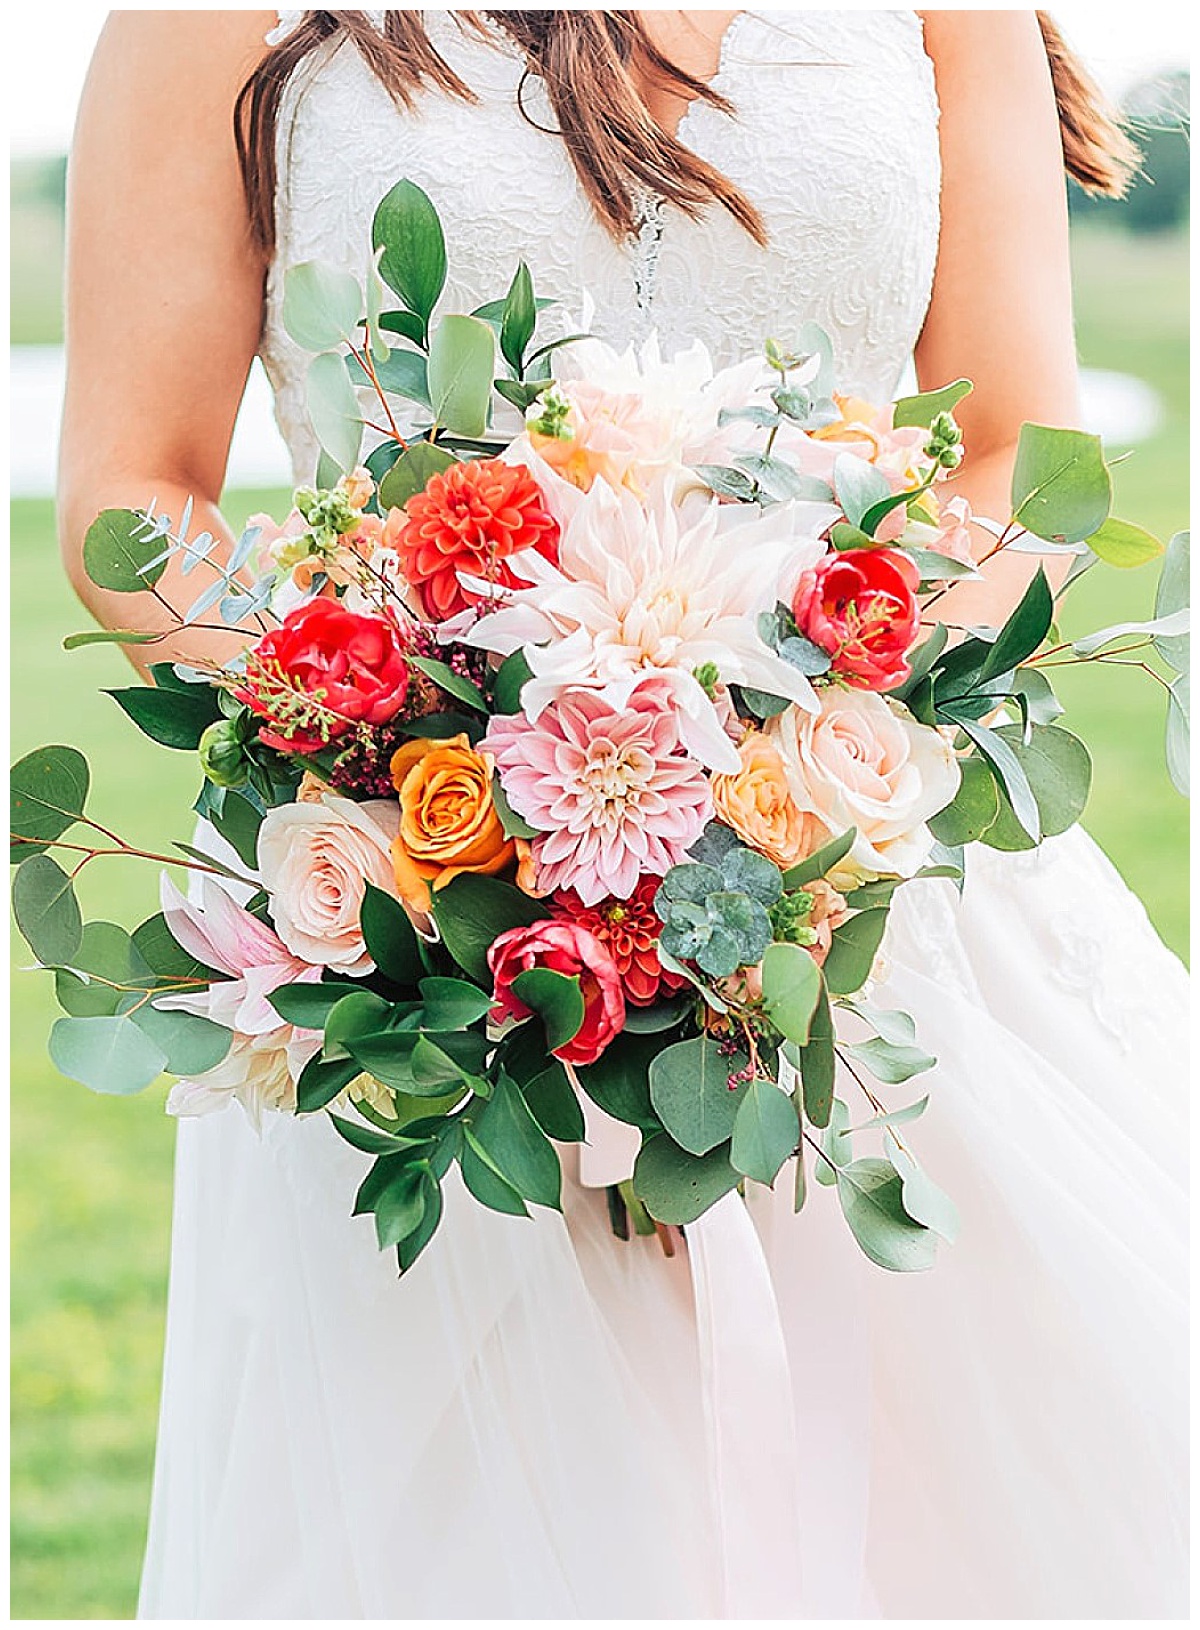 Colorful Bohemian Bridal bouquet at Emery's Buffalo Creek winery wedding venue in Bellville, TX. Samantha O' Neal Photography 